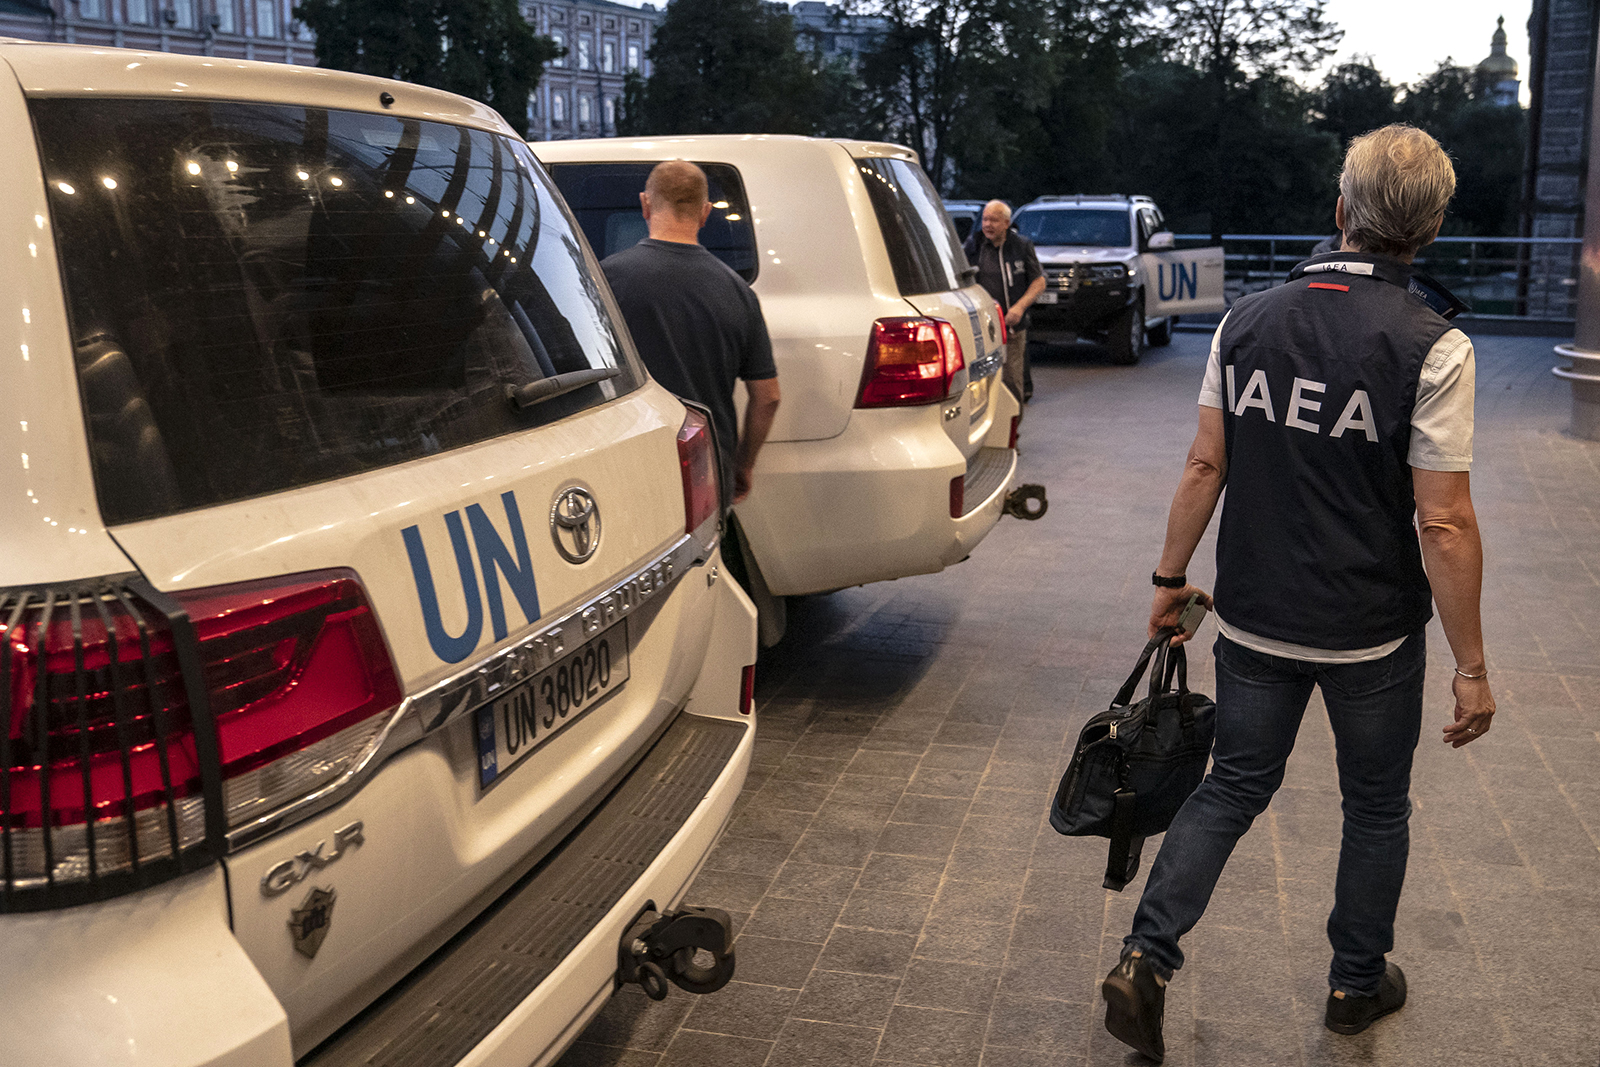 Personnel from the International Atomic Energy Agency and the United Nations prepare to depart for Zaporizhzhia from a hotel in Kyiv, Ukraine on August 31.